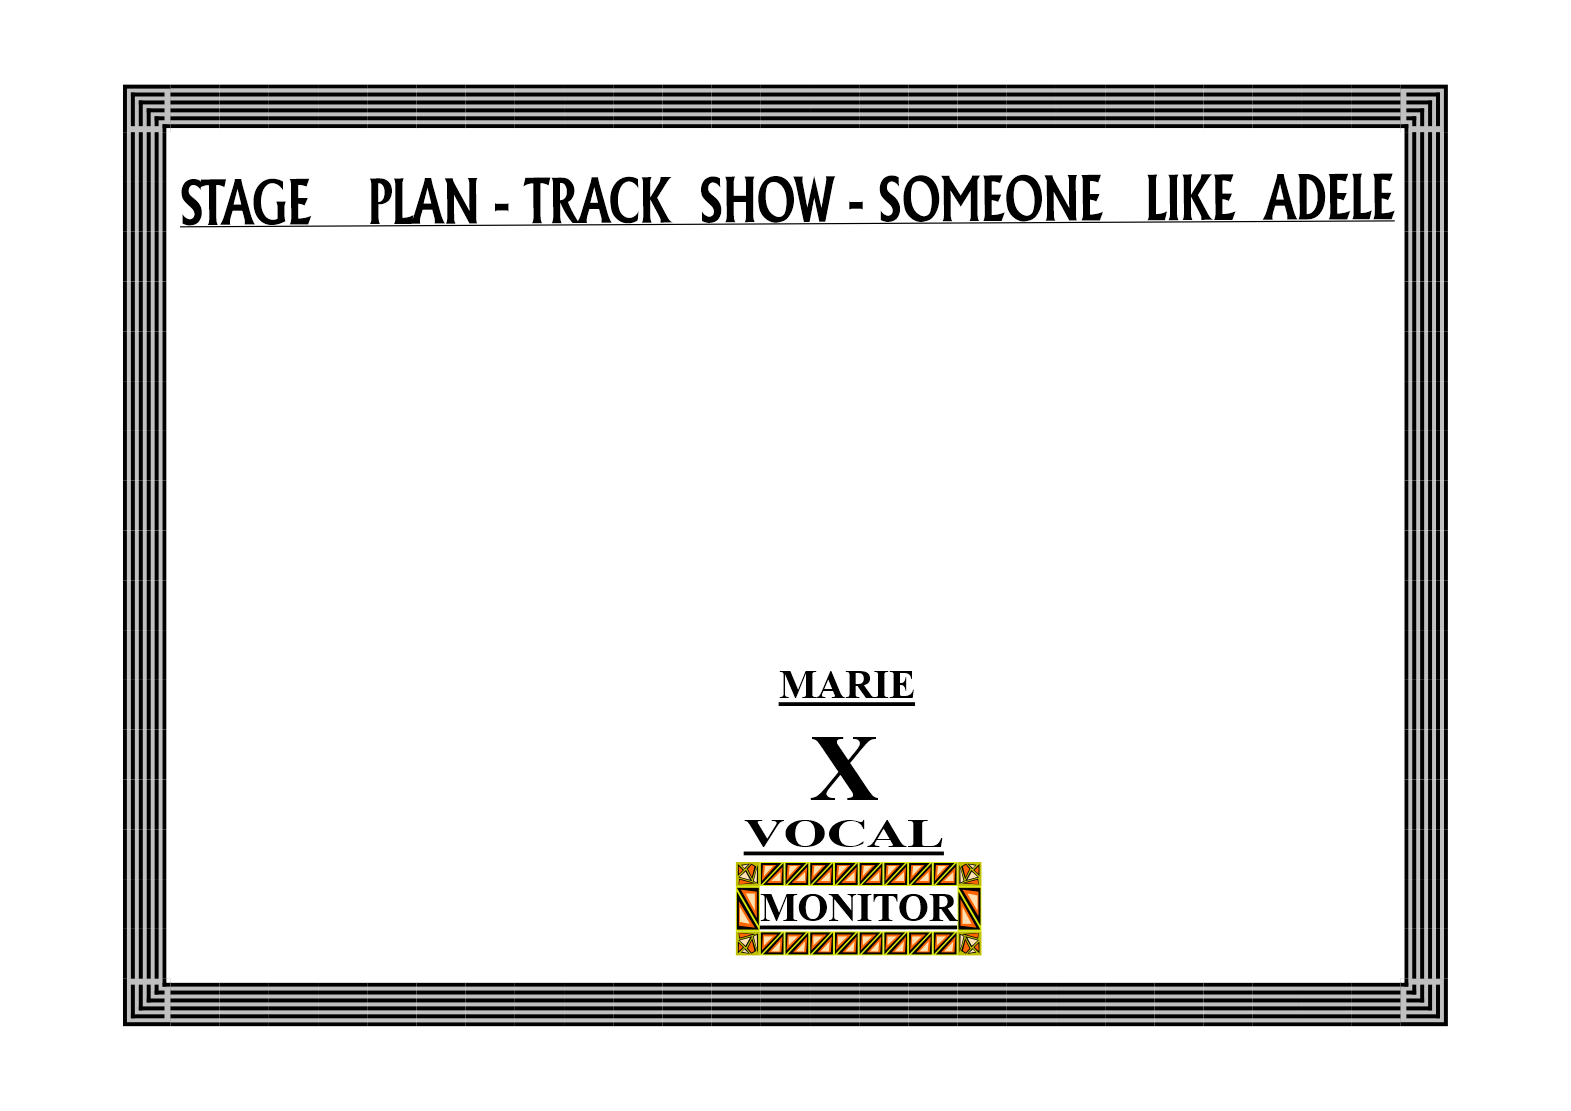 STAGE PLAN - SOMEONE LIKE ADELE - TRACK SHOW